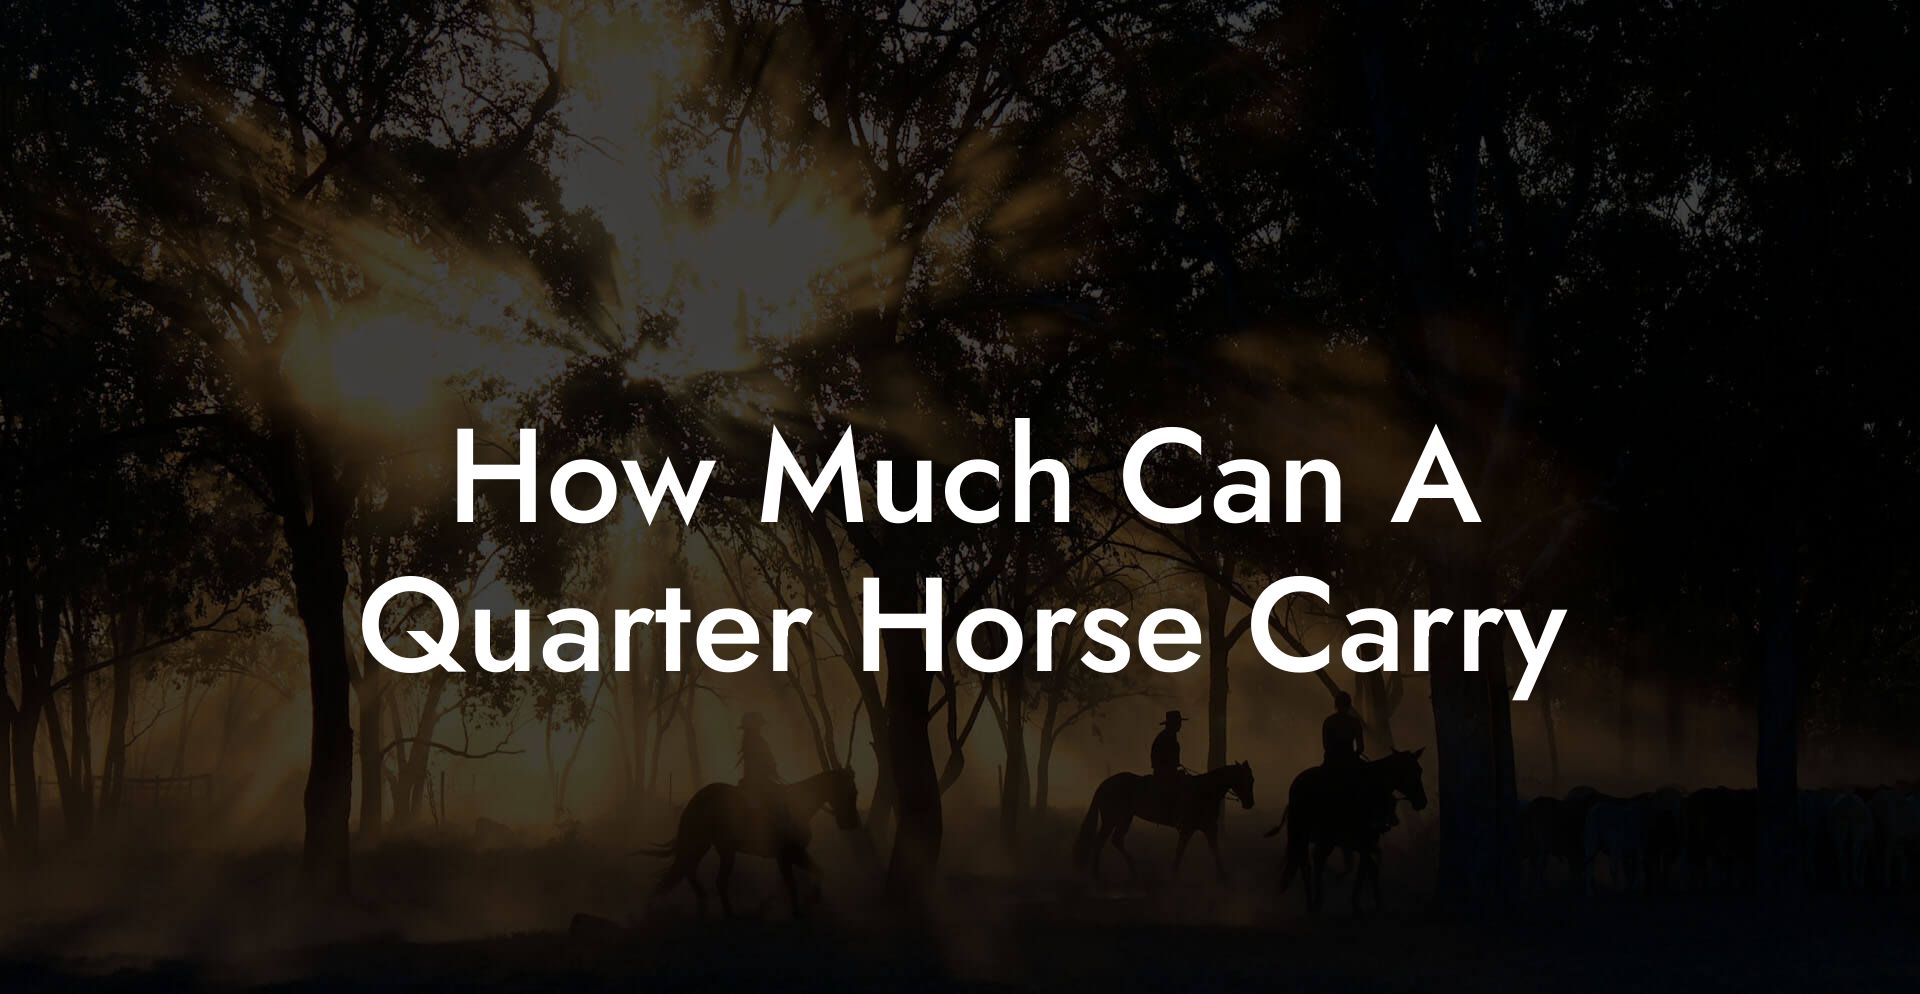 How Much Can A Quarter Horse Carry